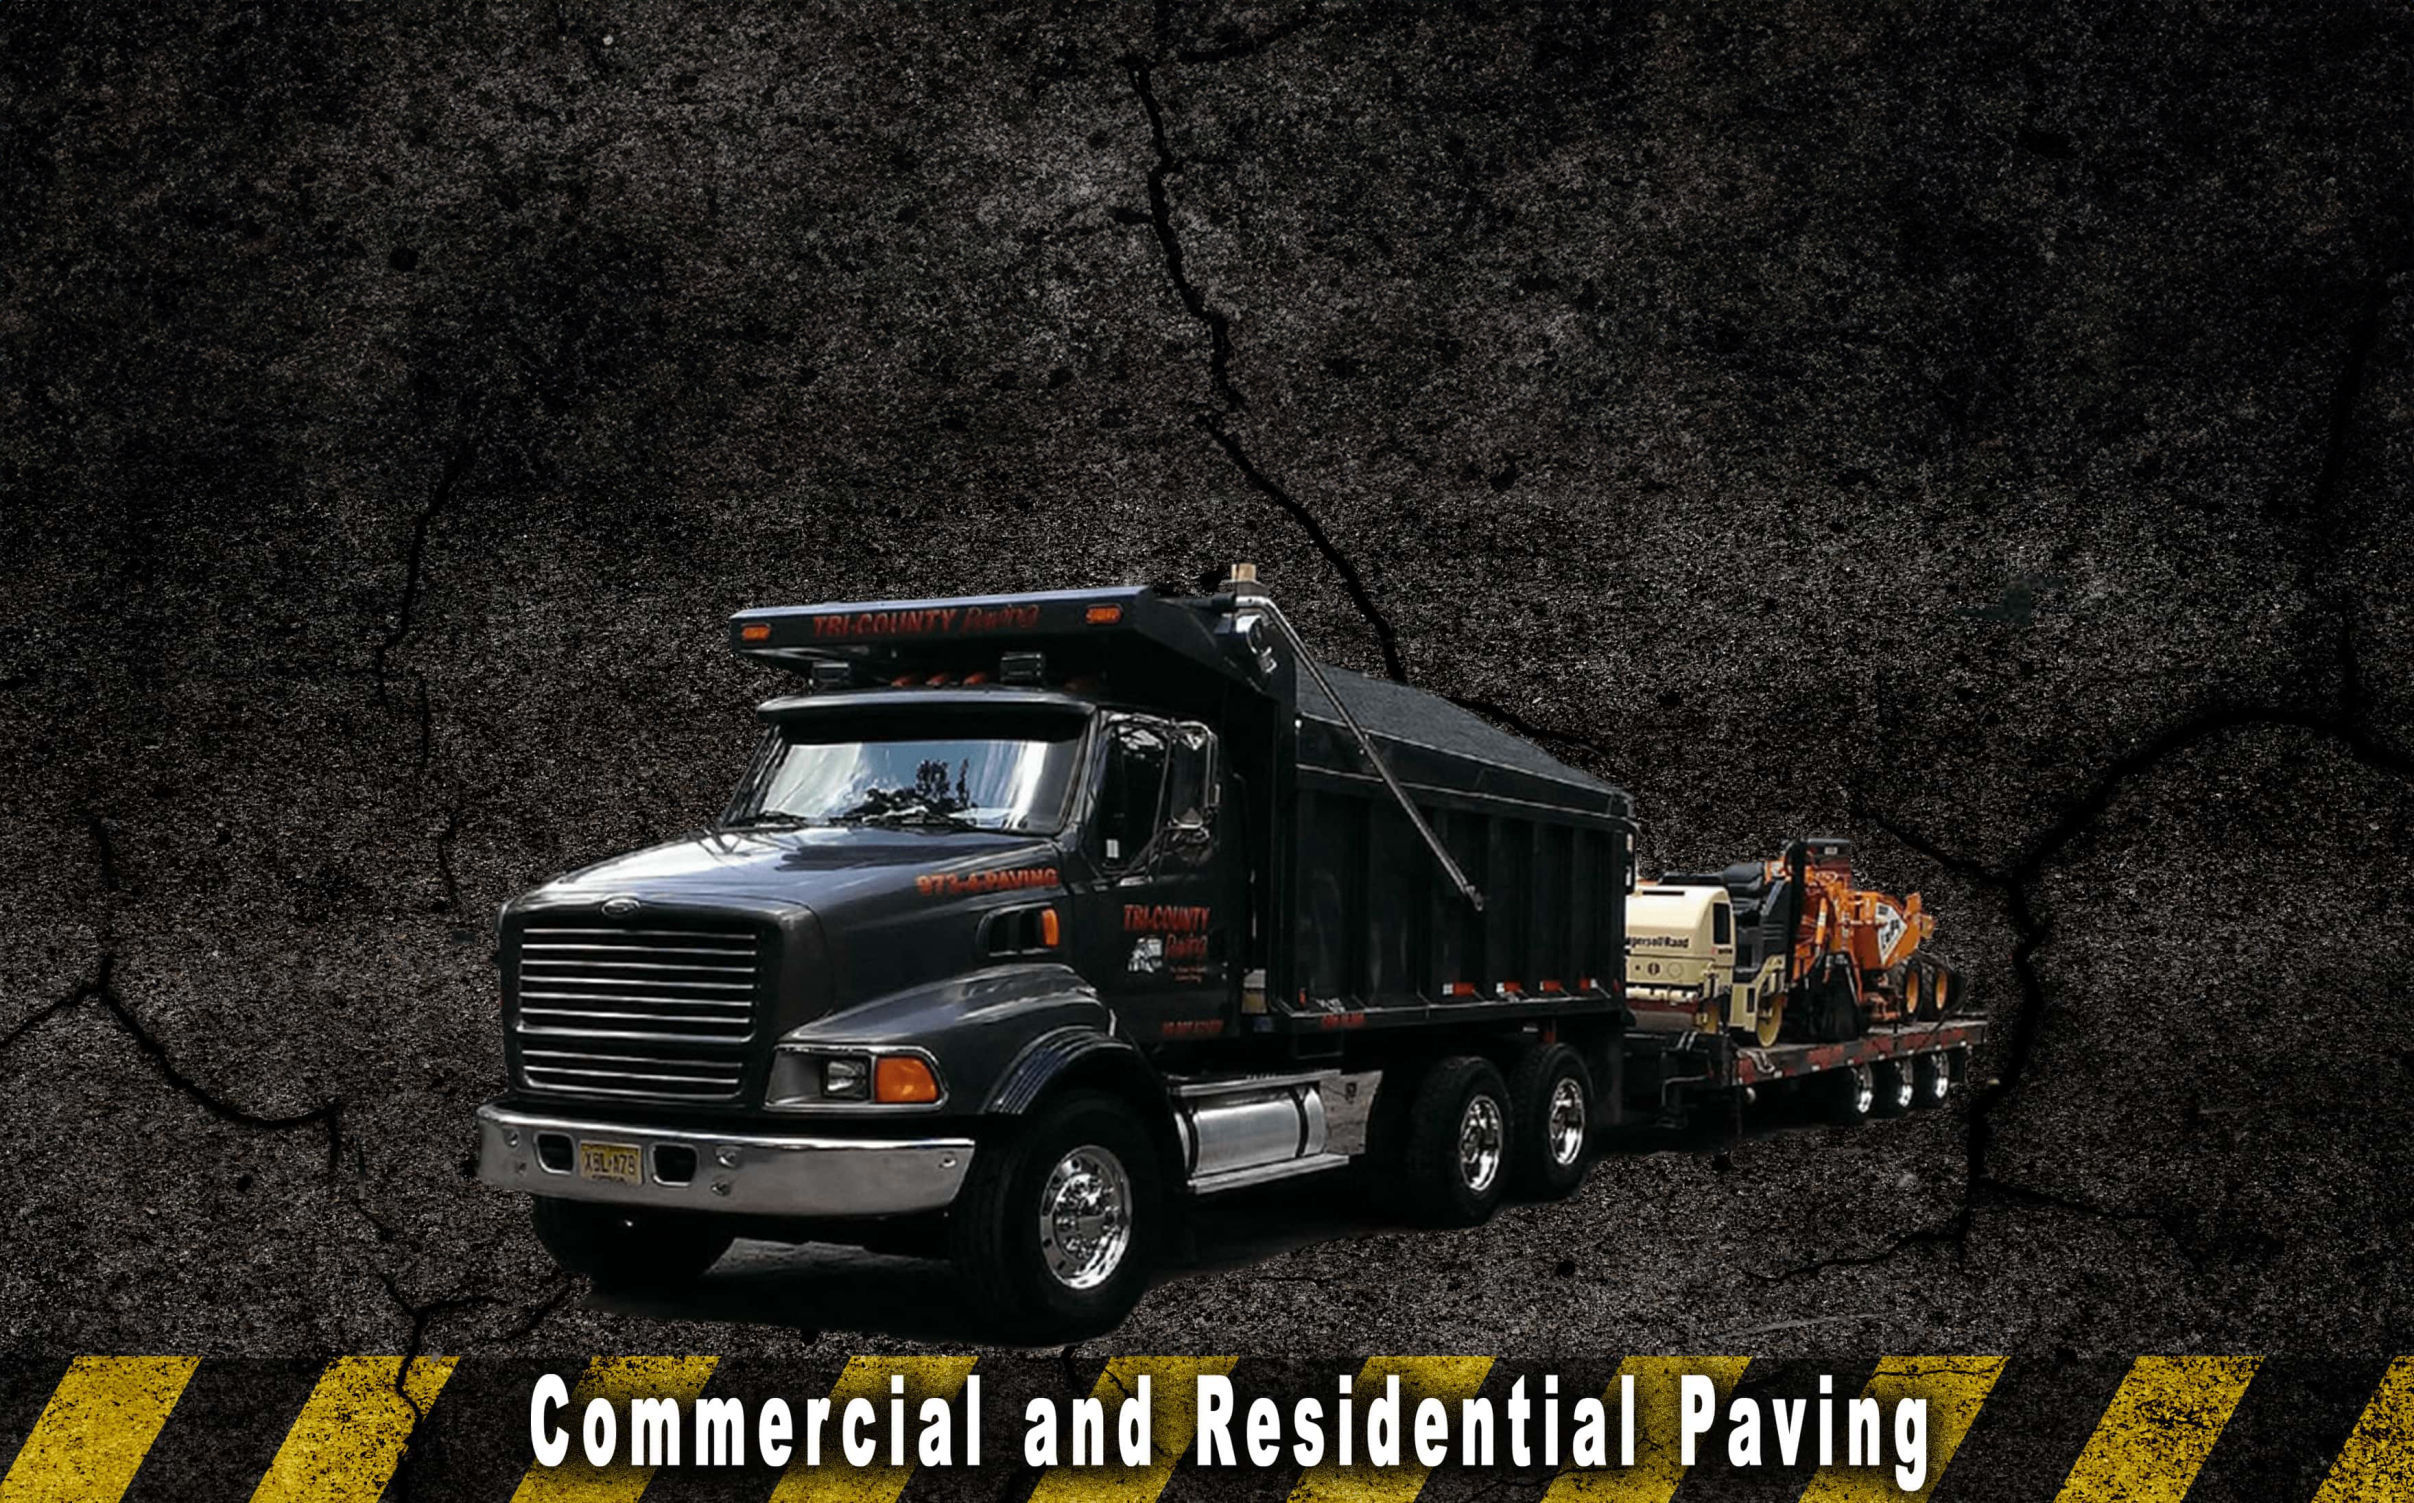 Tri-County Driveway and Parking lot Paving : New Jersey